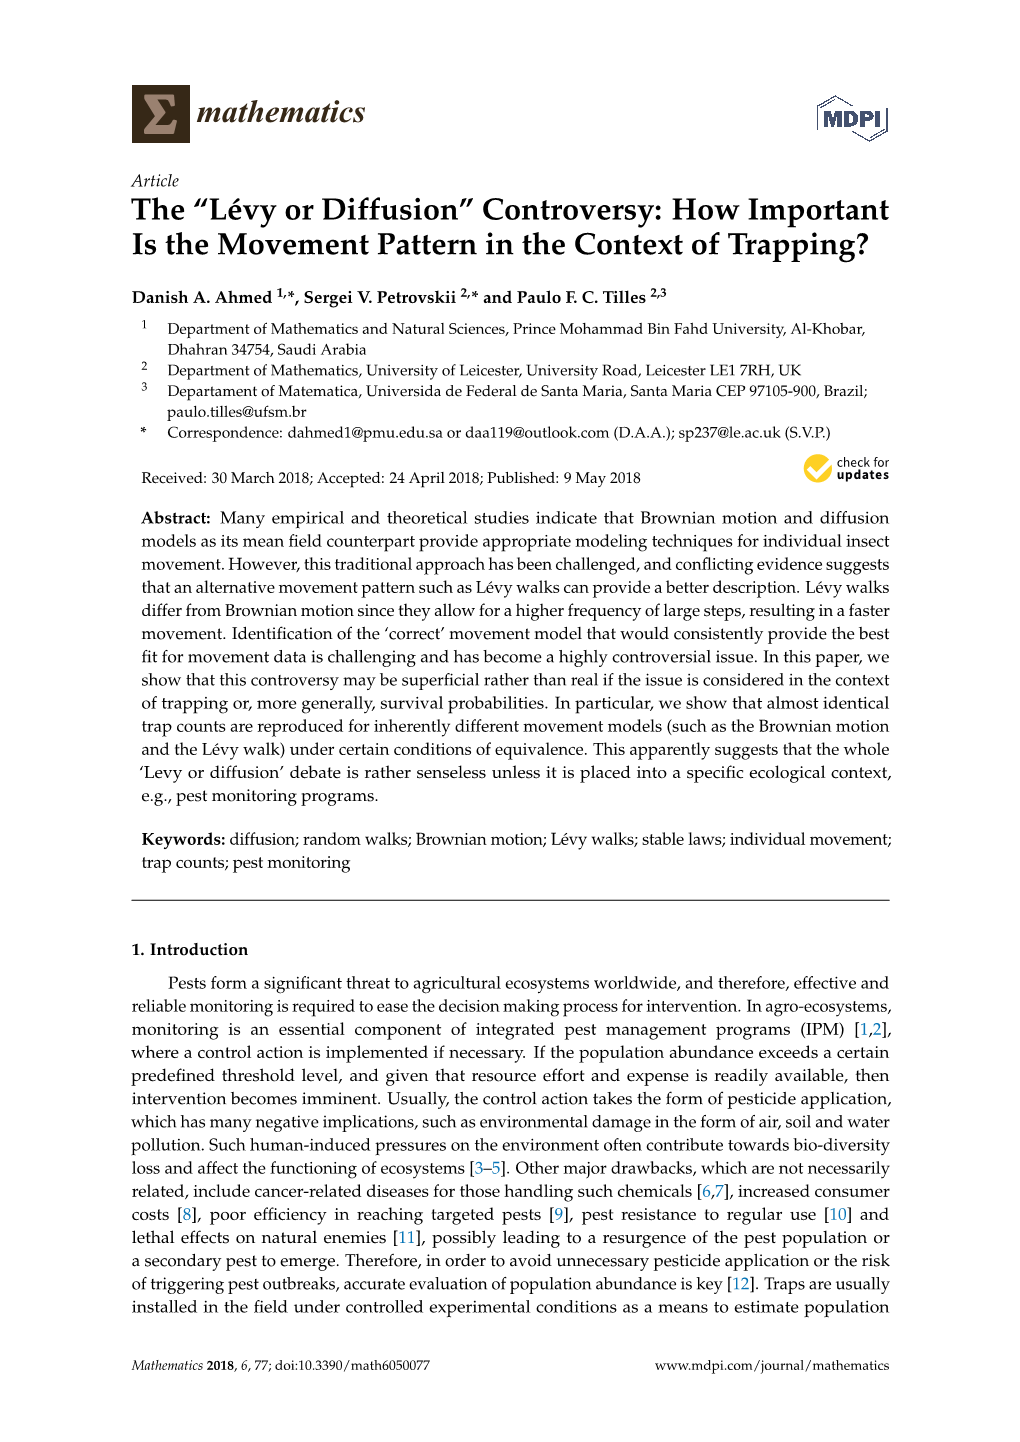 The “Lévy Or Diffusion” Controversy: How Important Is the Movement Pattern in the Context of Trapping?